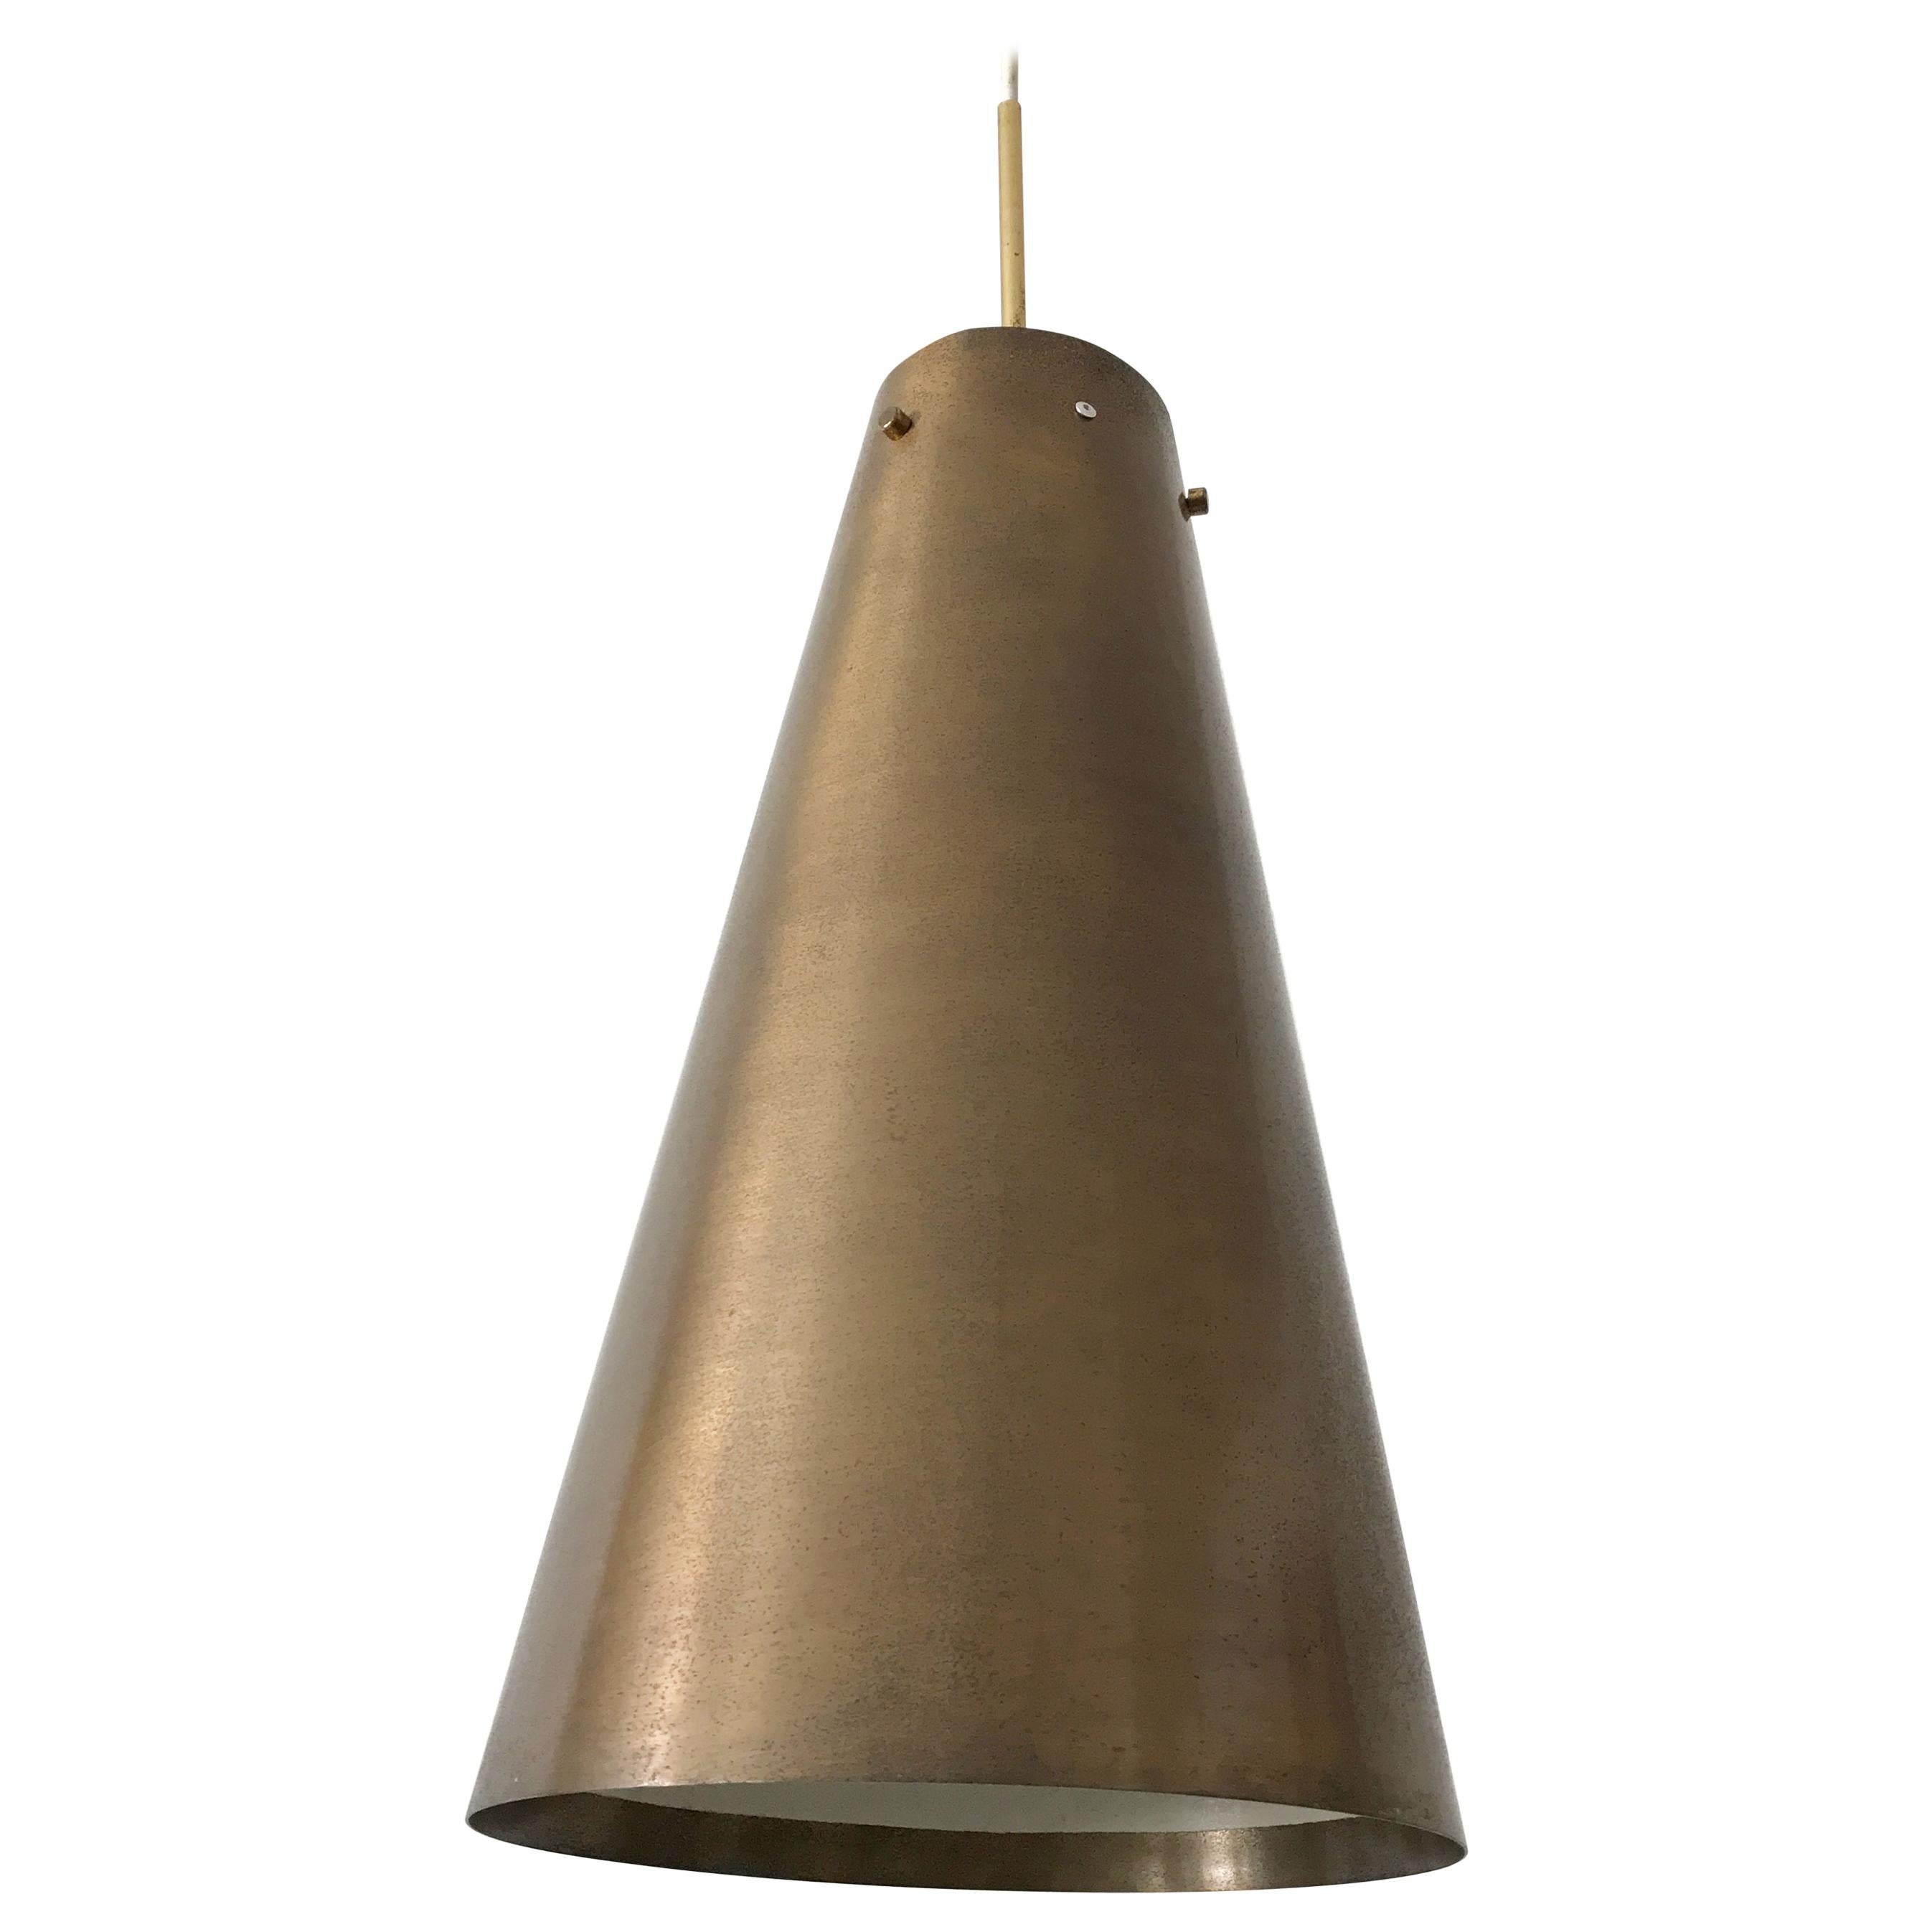 Rare and Large Mid-Century Modern Brass Pendant Lamp, 1950s, Germany